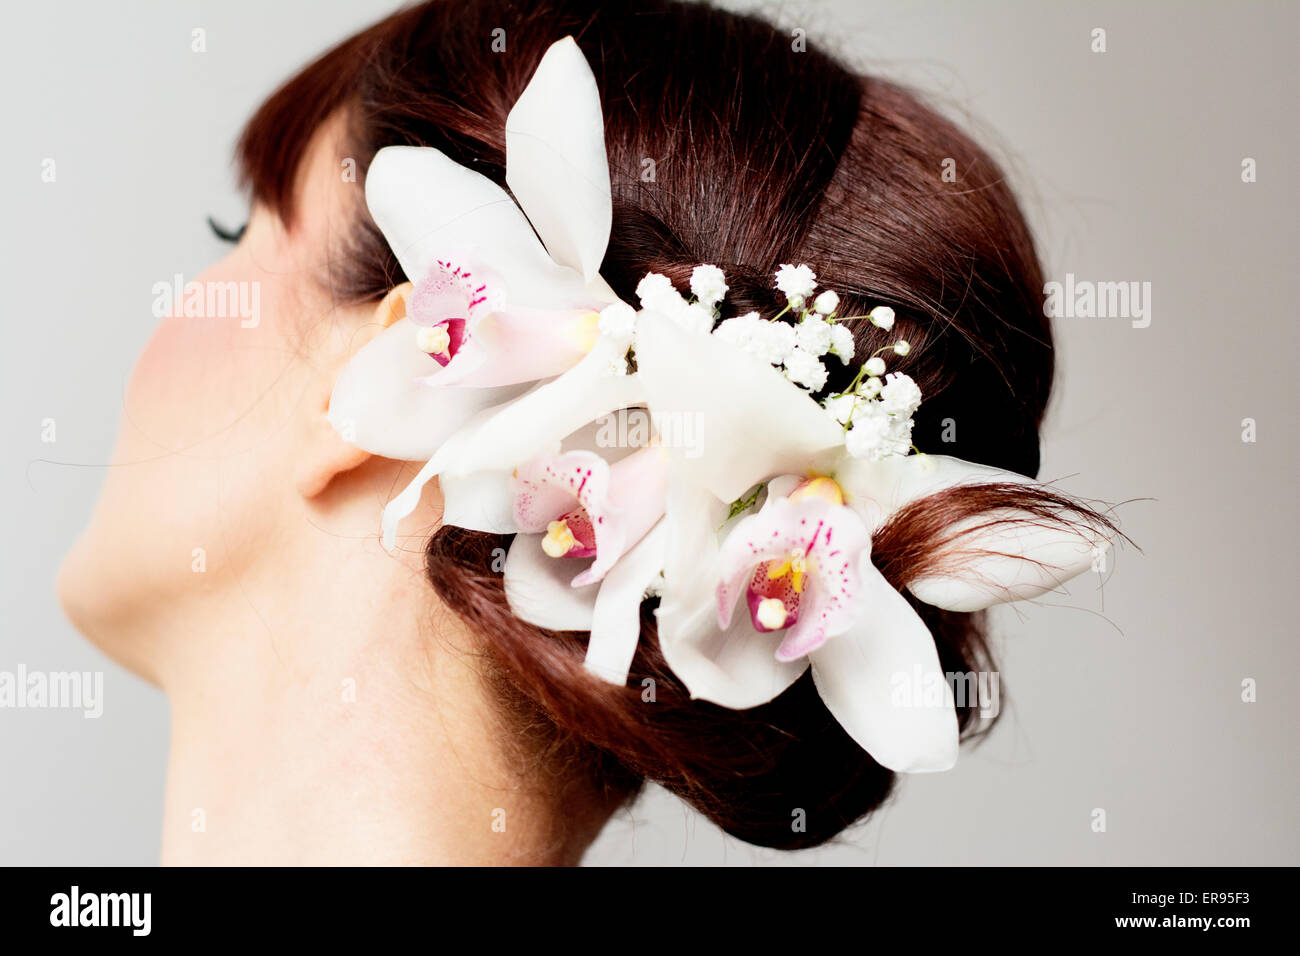 Bride is posing her hair style with orchids for her wedding day. Bride has bangs. Stock Photo